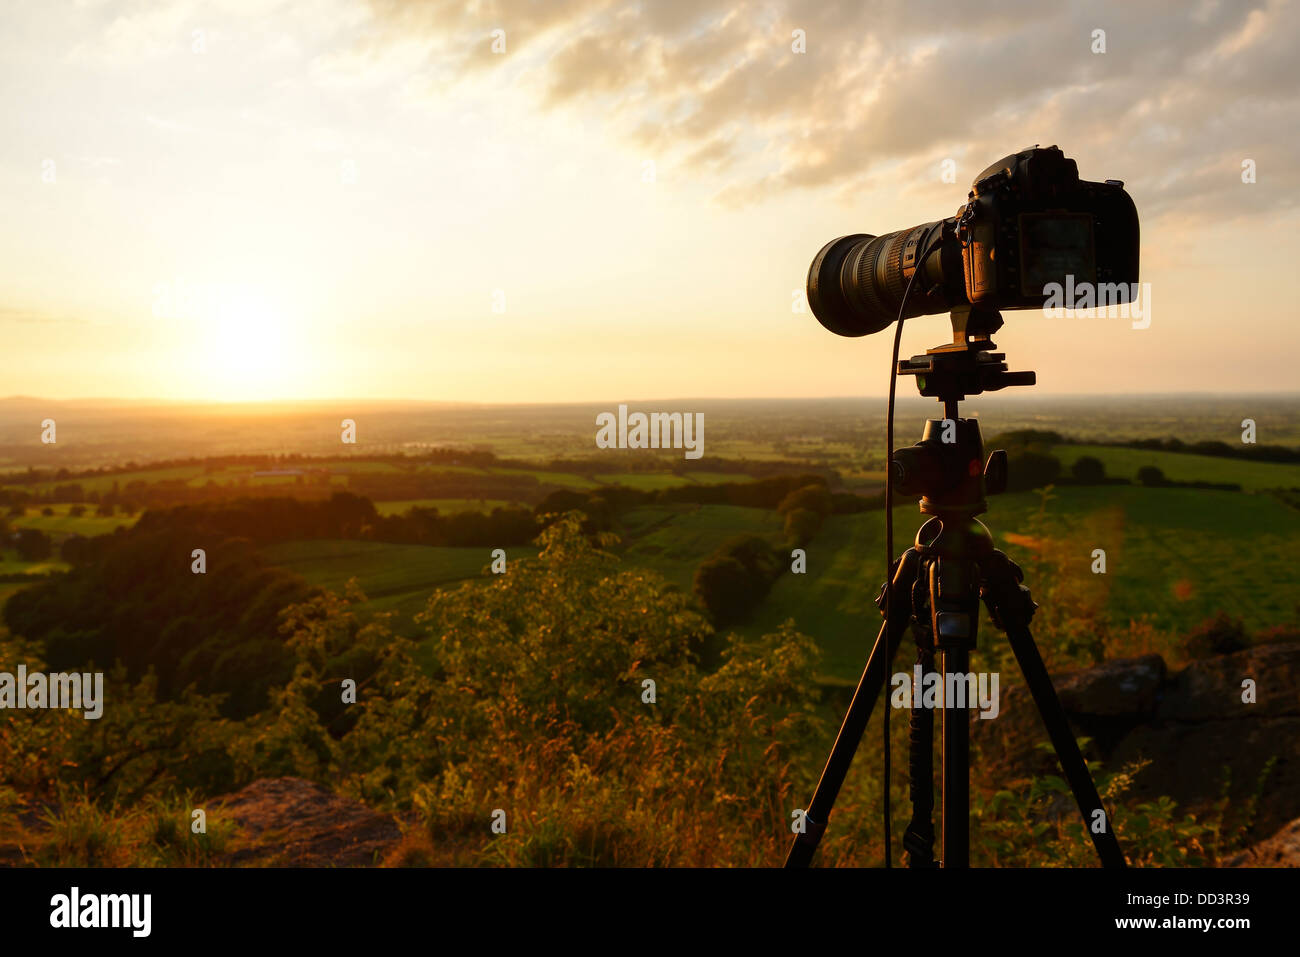 Nikon D800 camera and tripod taking a sunset landscape photograph looking over the Cheshire Plain UK Stock Photo